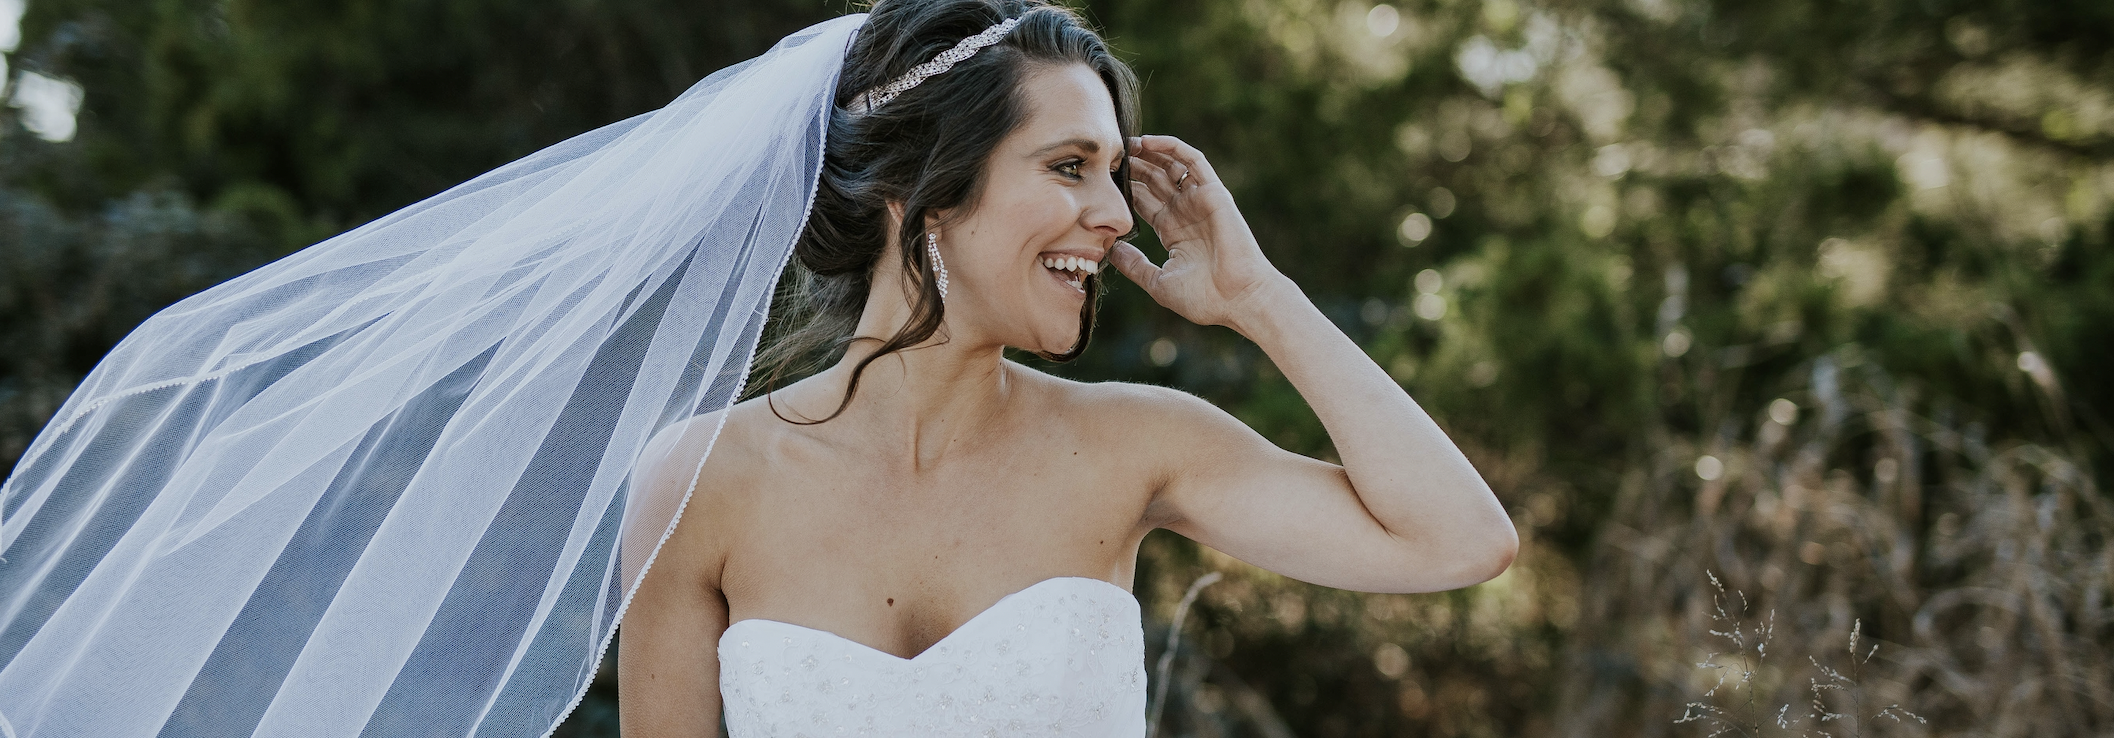 How To Decide on Wedding Day Makeup &amp; Hair Image